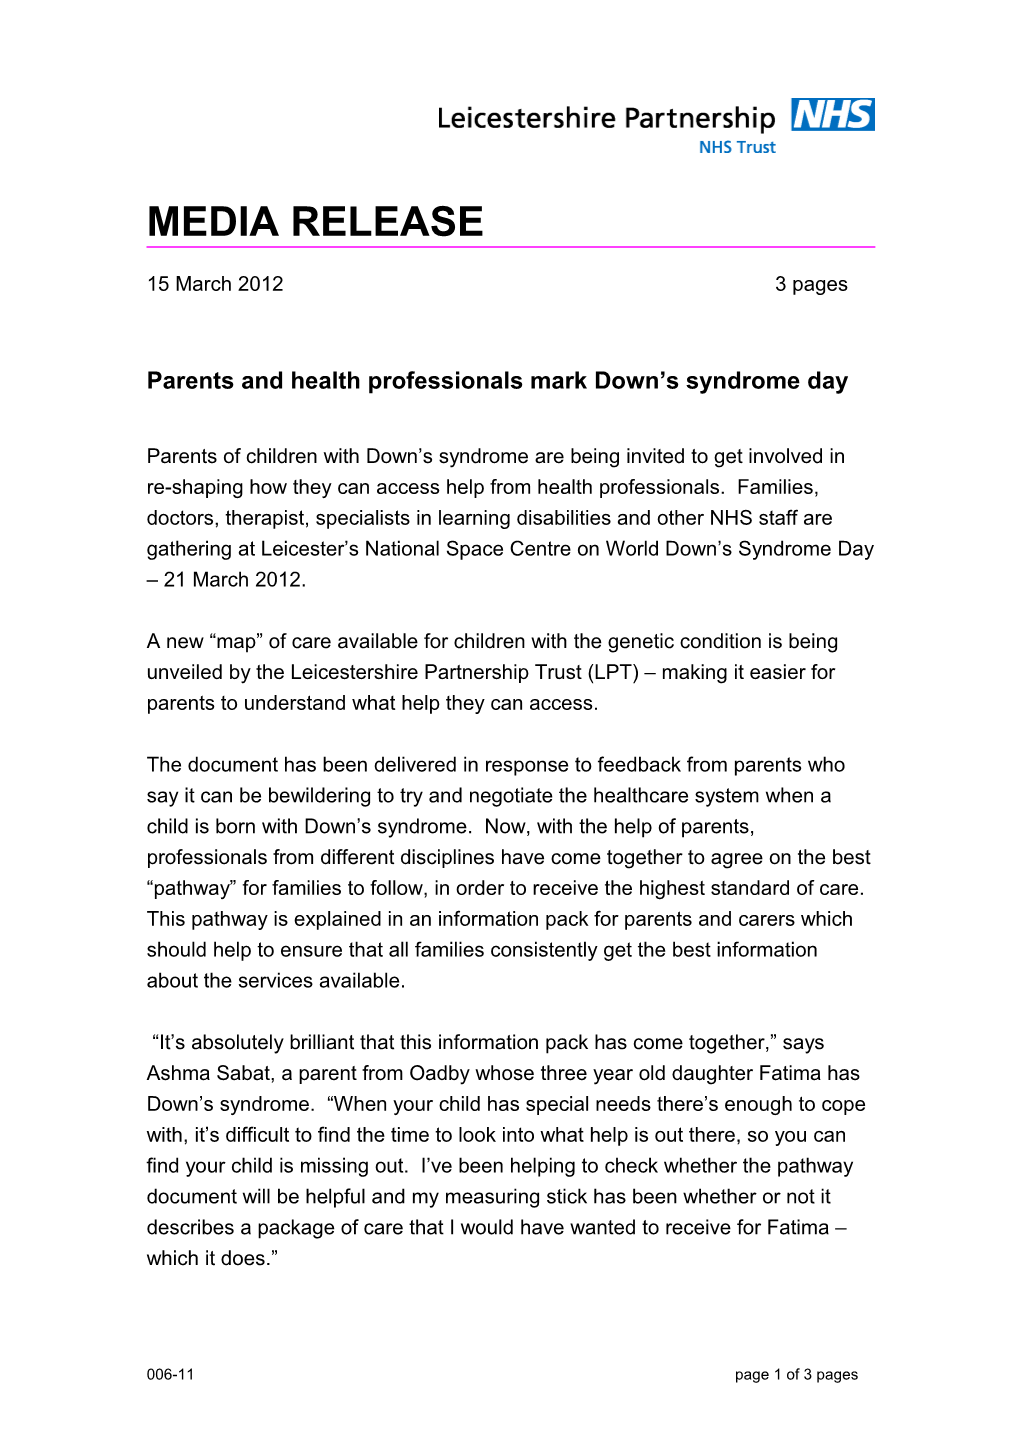 Parents and Health Professionals Mark Down S Syndromeday